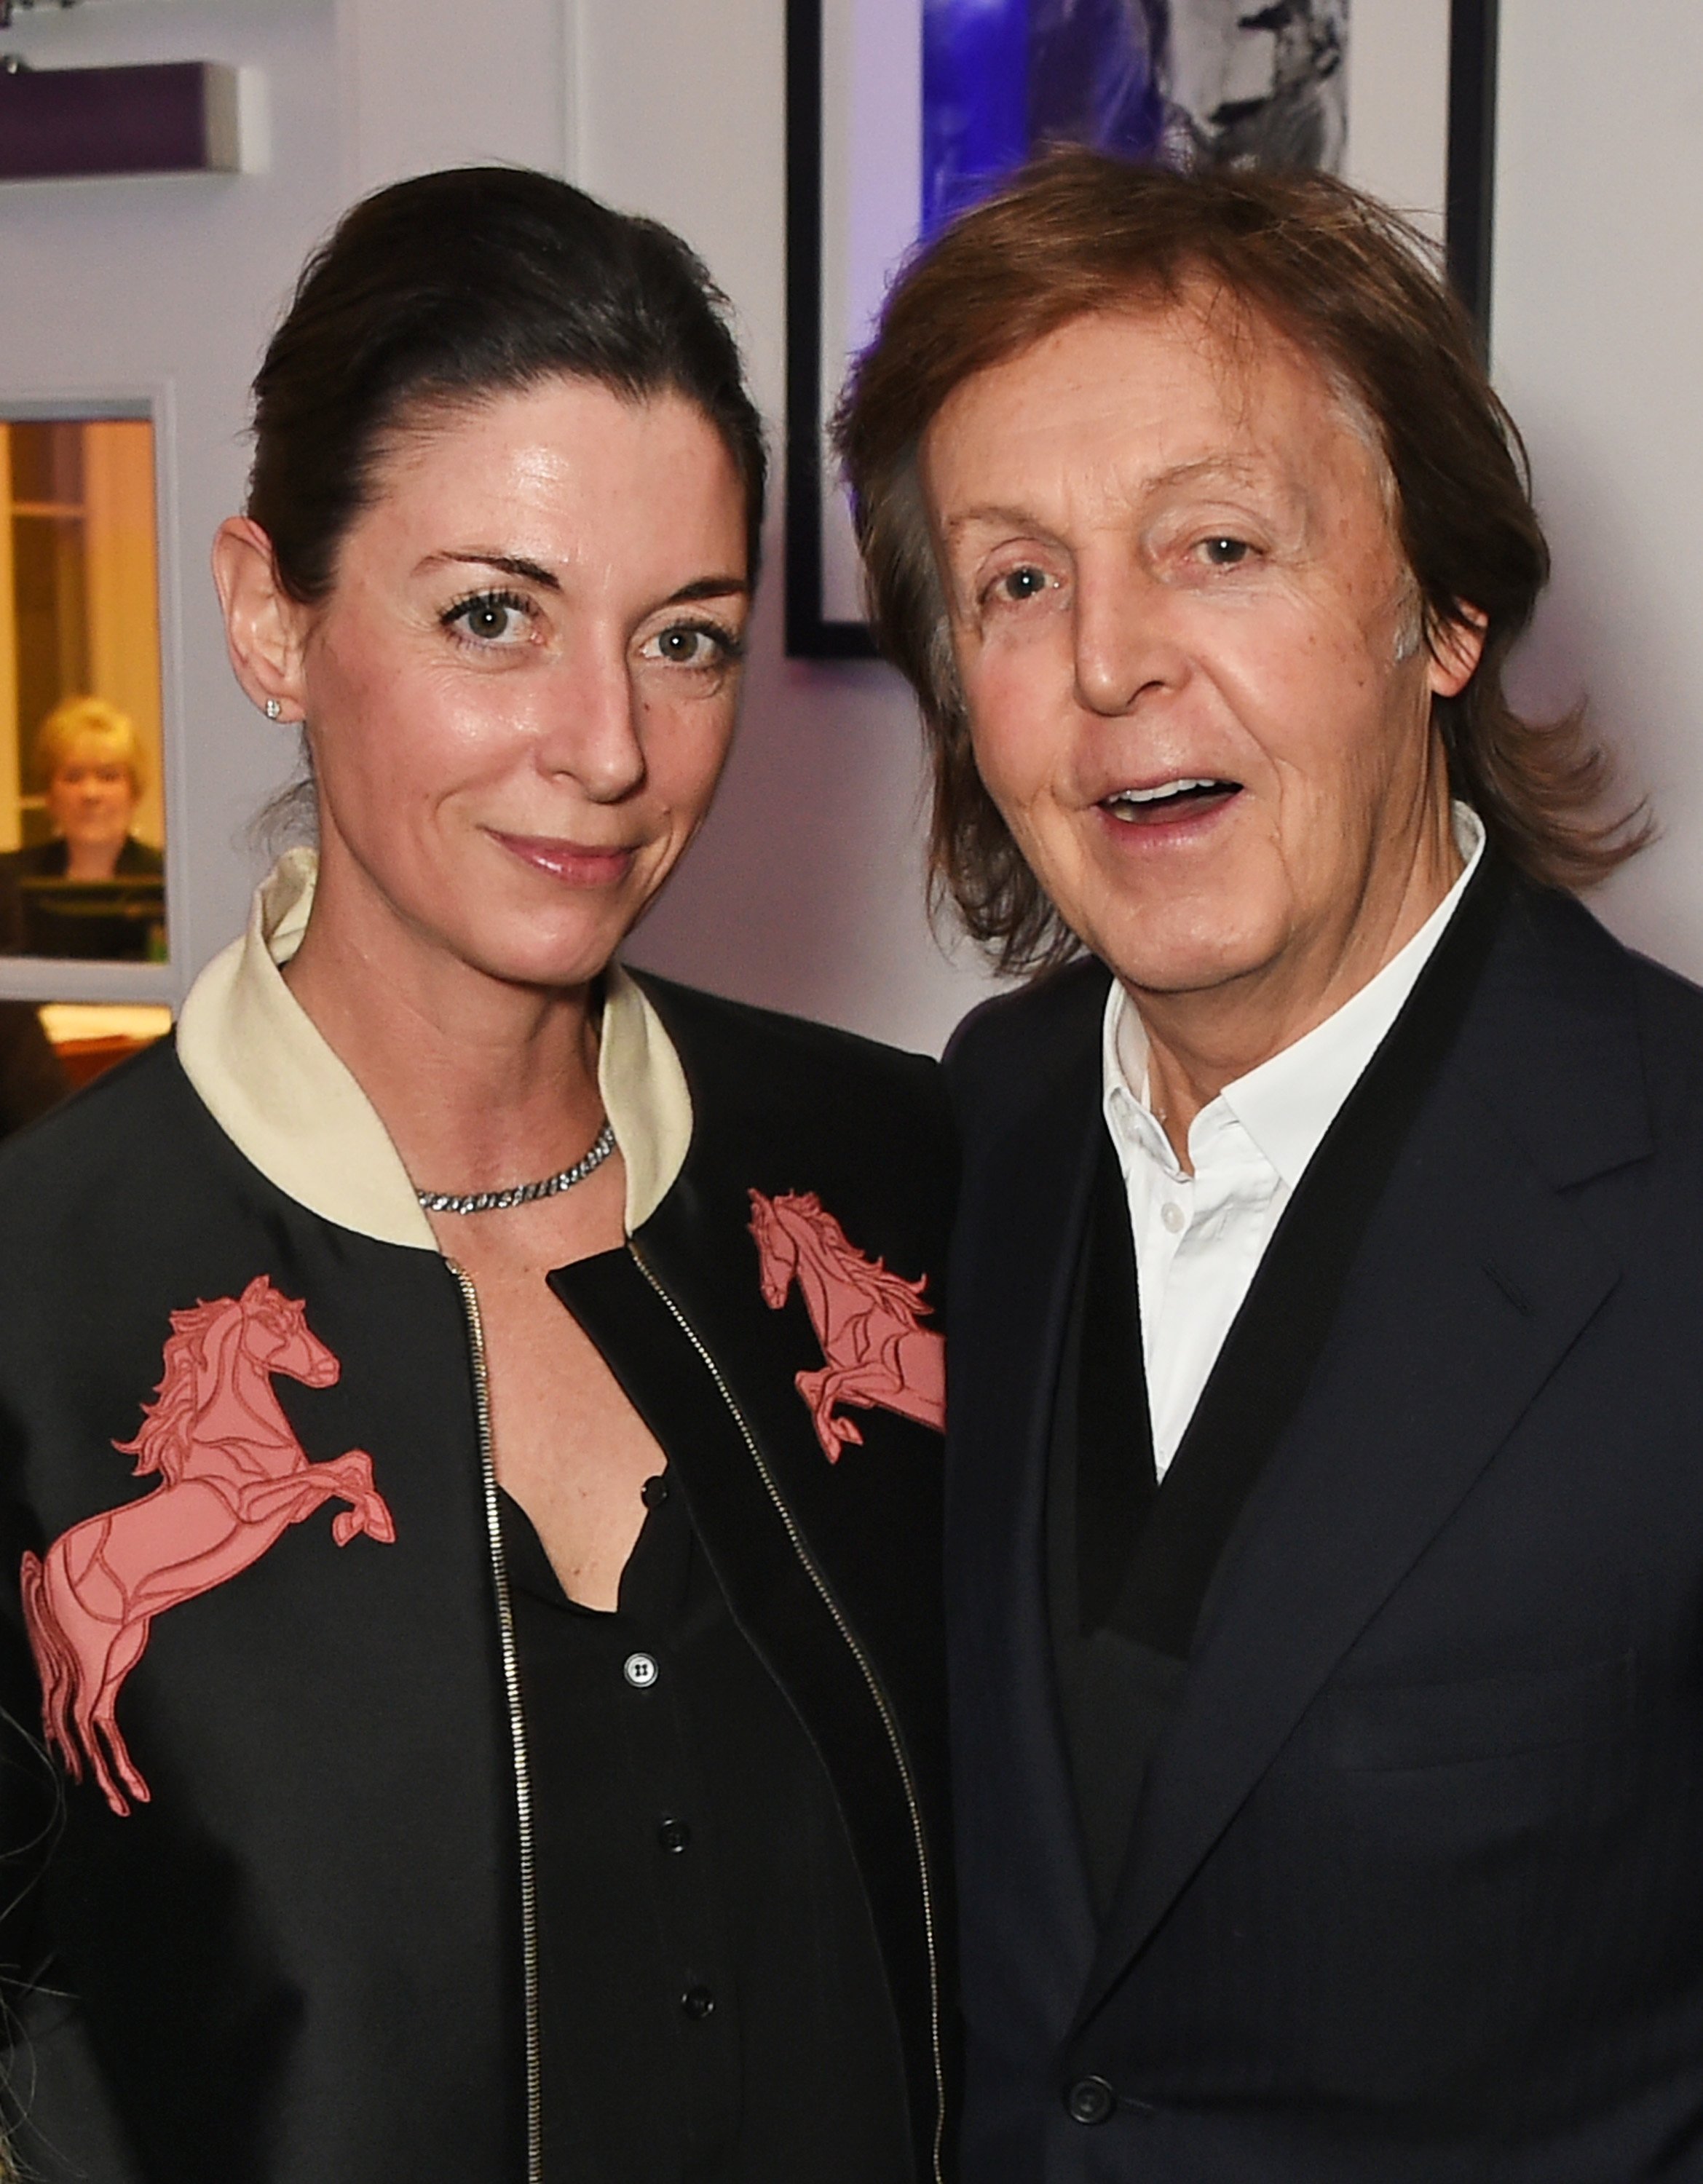 Mary McCartney (L) and Sir Paul McCartney attend a cast and crew screening of "This Beautiful Fantastic" at BAFTA on February 5, 2016 in London, England. | Source: Getty Images 